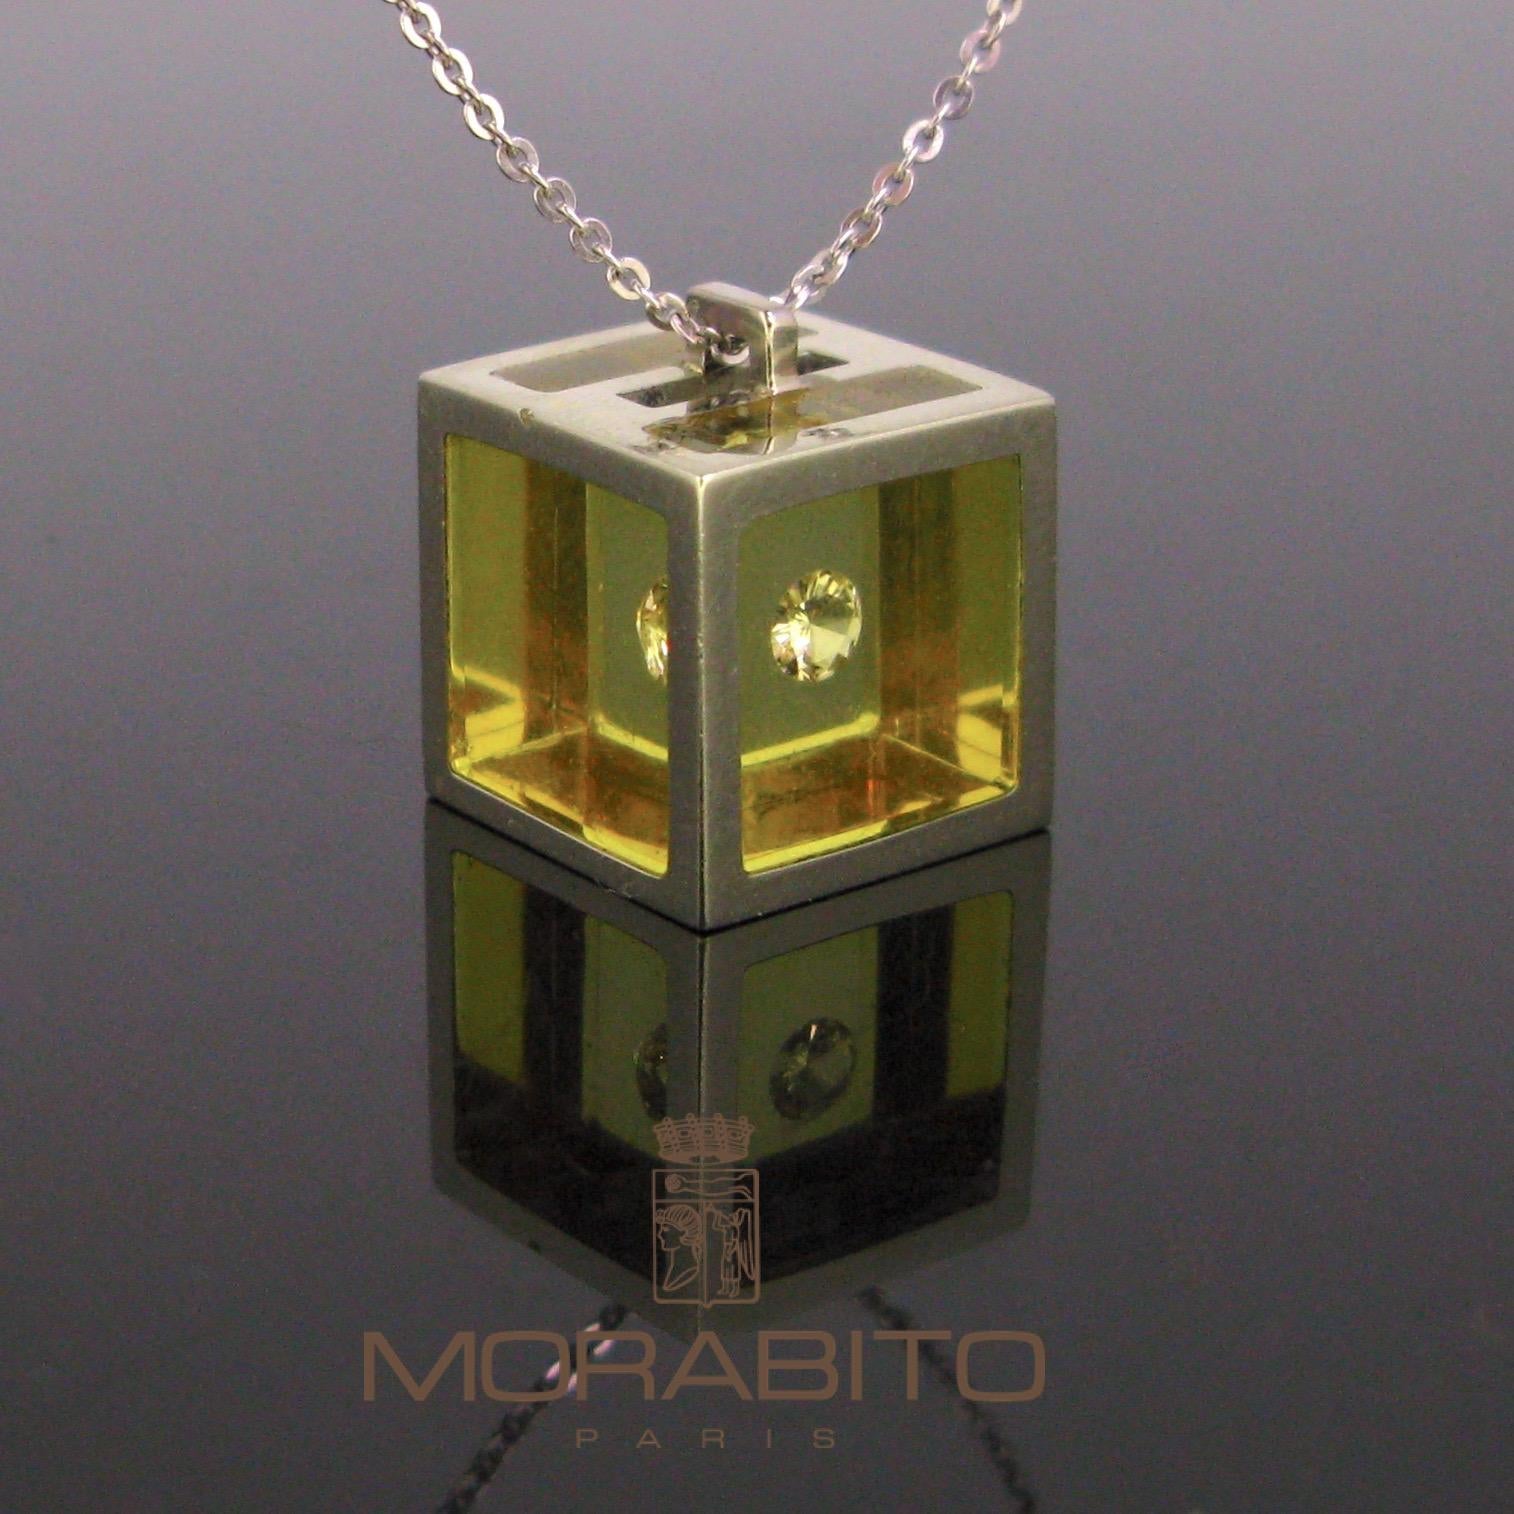  A unique piece made by the French jeweller Pascal MORABITO. In 1972 he created a cube made in synthetic crystal with golden edge with a trapped diamond inside. The cube was name the Captive Diamond. Its creation is now exhibited in New York in the